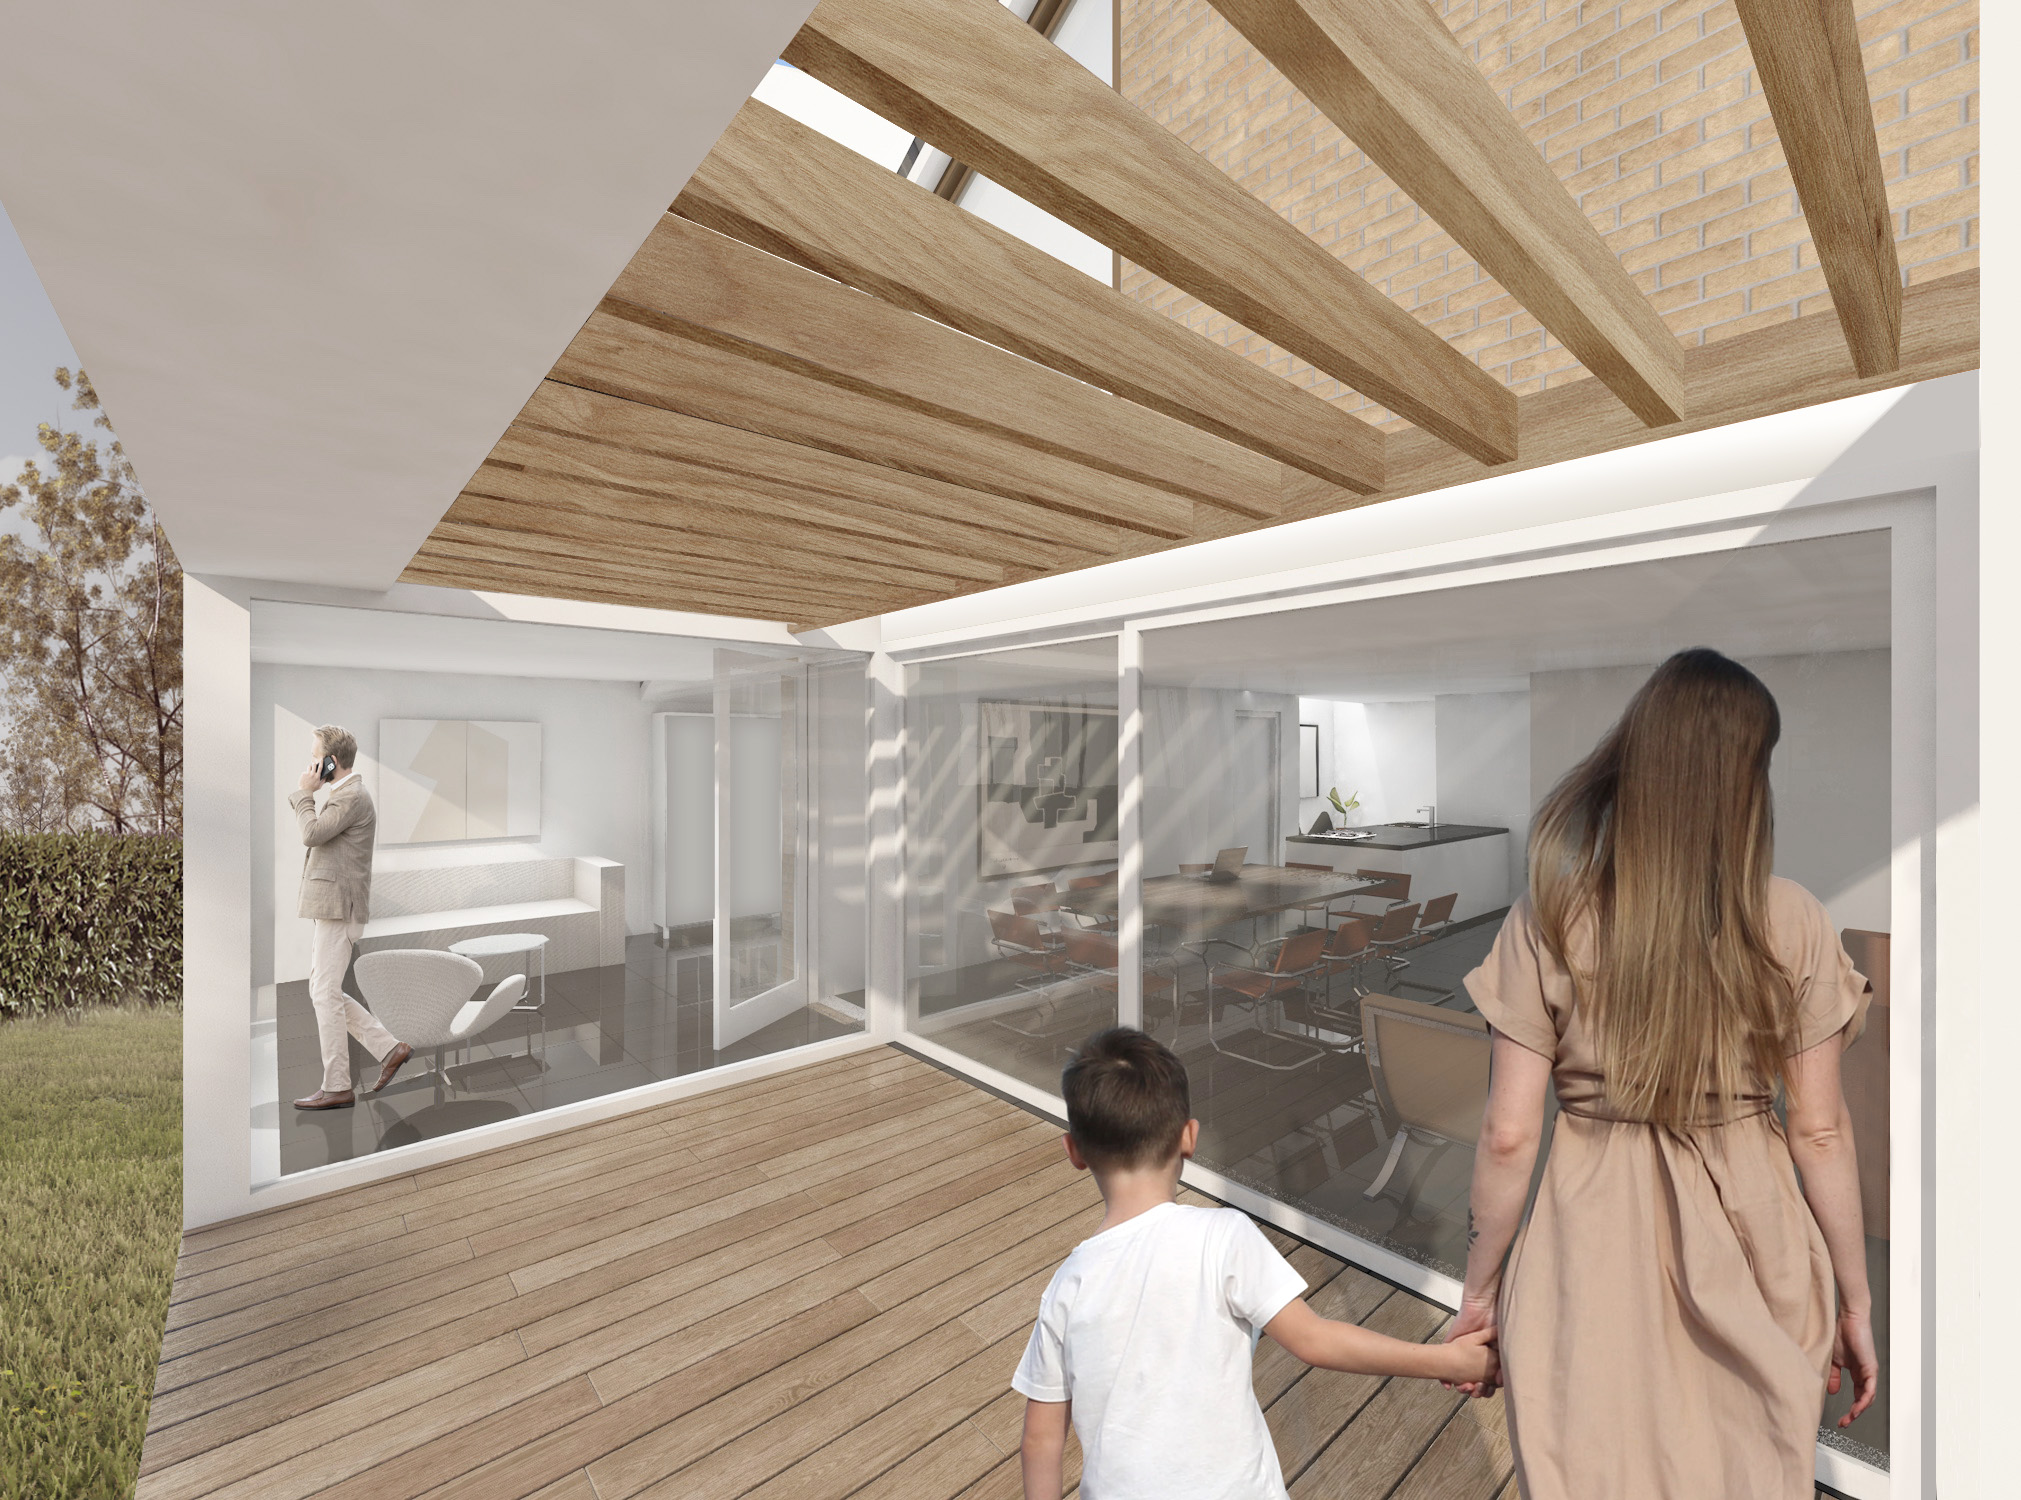 Architectural visualisation showing the garden extension of the private residence, featuring a red cedar timber roof that provides both shelter and shading. The warmth of the timber, used for both the deck and the roof structure, ties into the earthy tones of the buff color bricks, in contrast with the crisp white aluminum window frames. Design by MOST Architecture, Rotterdam.